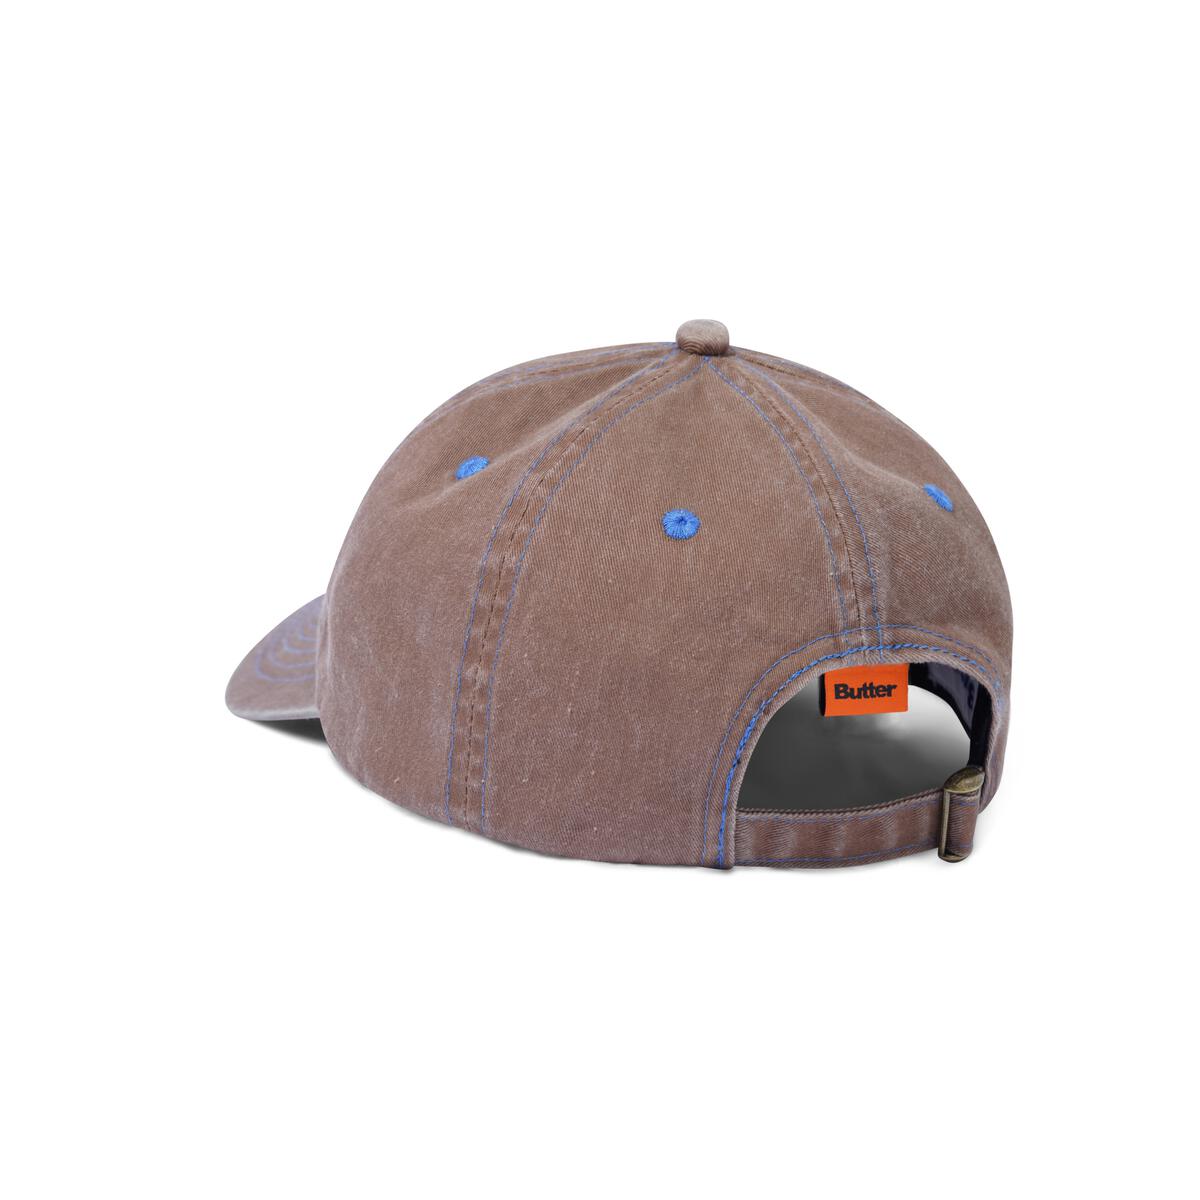 Rounded 6 Panel Cap - Bark